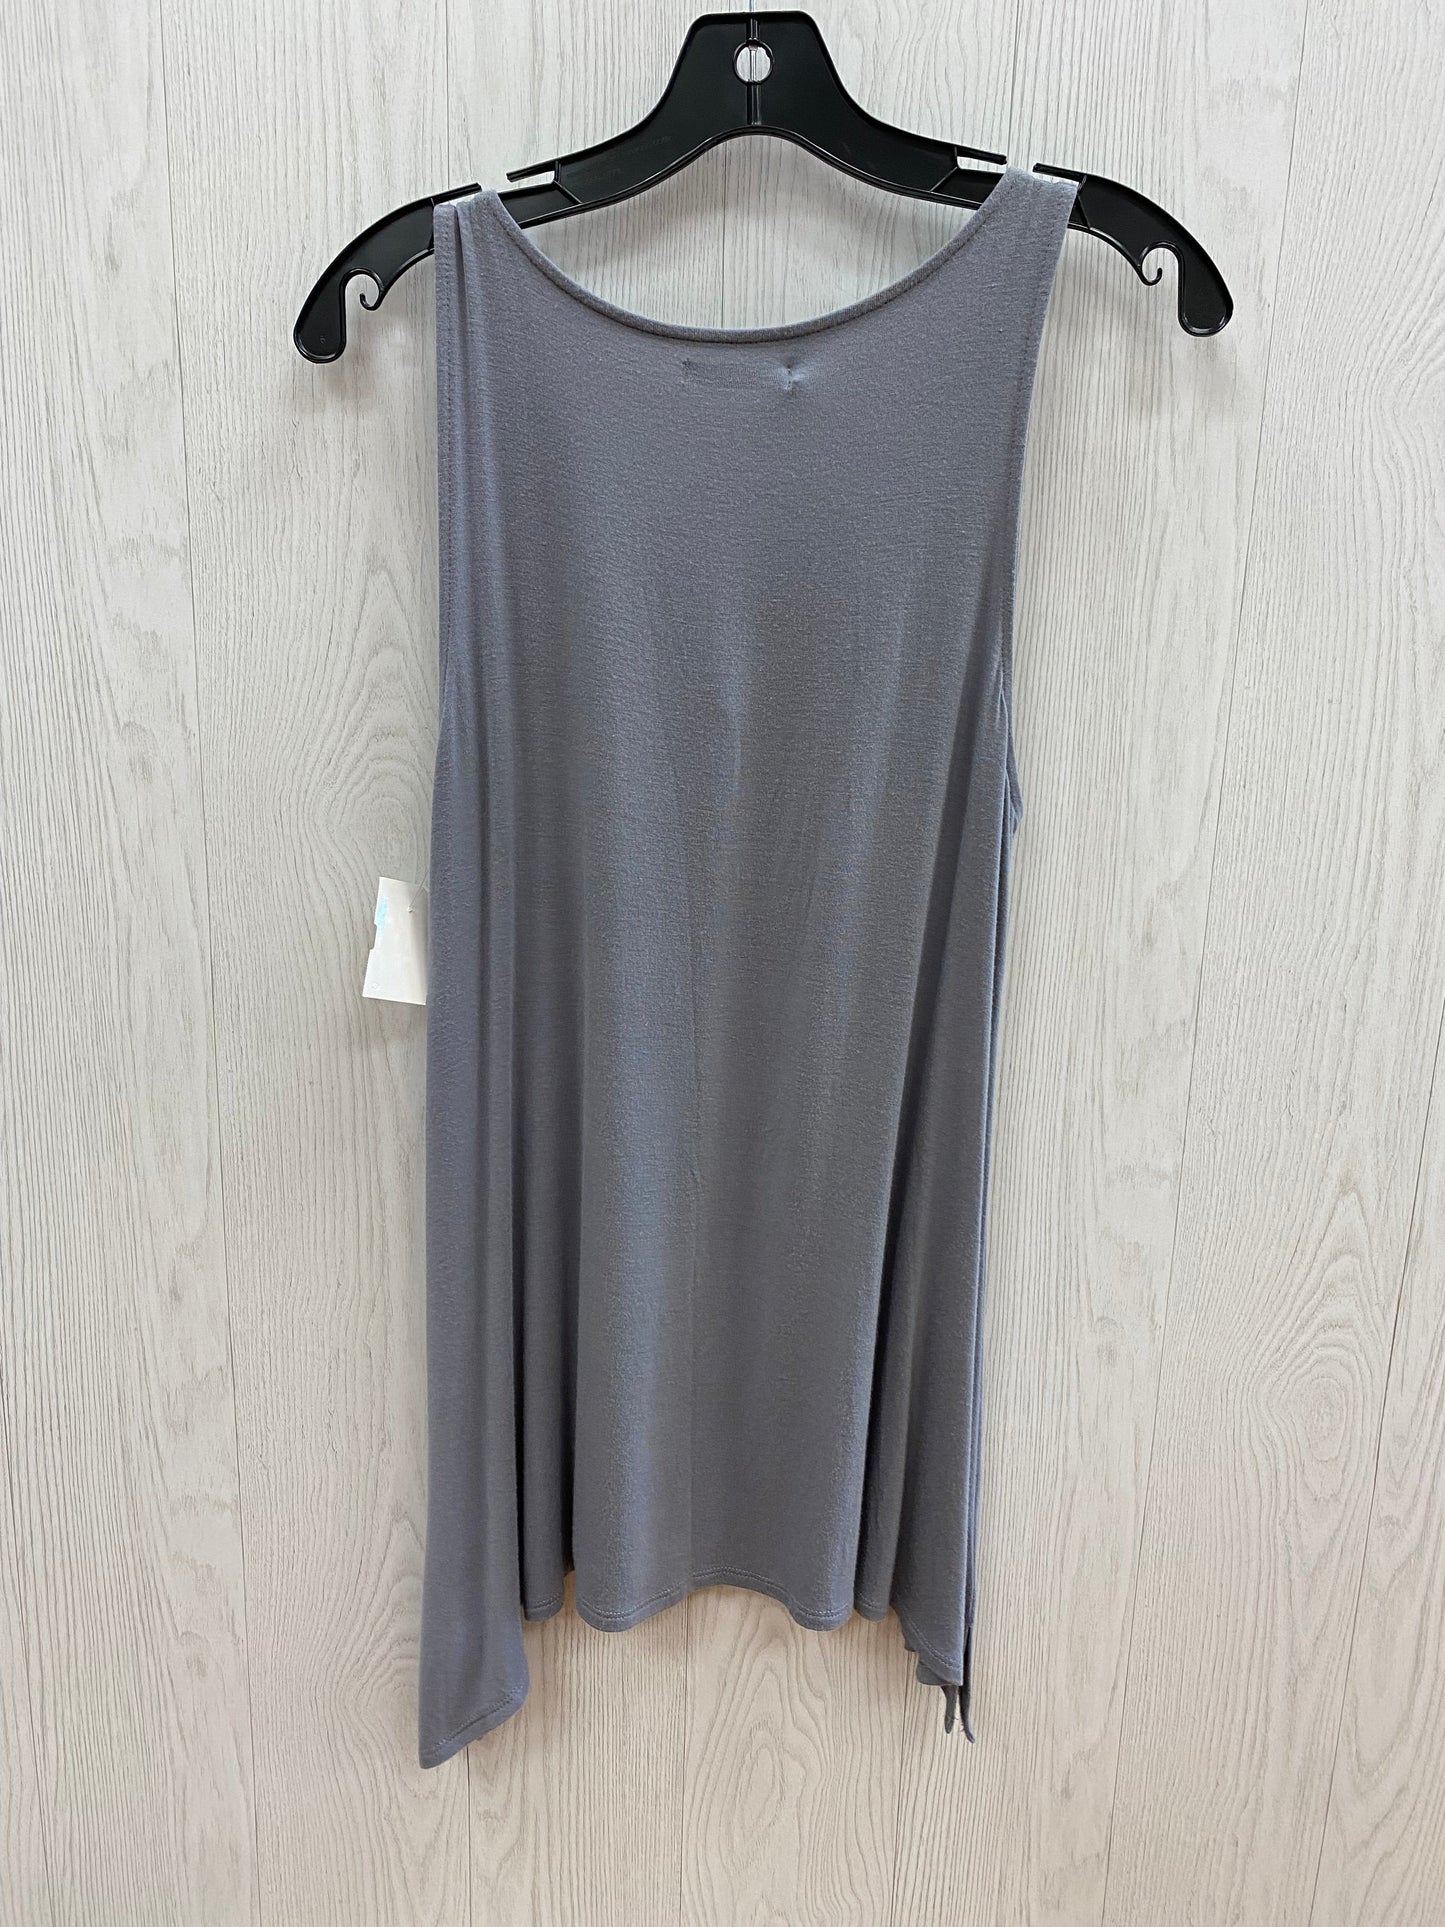 Stone Top Sleeveless Maurices, Size S